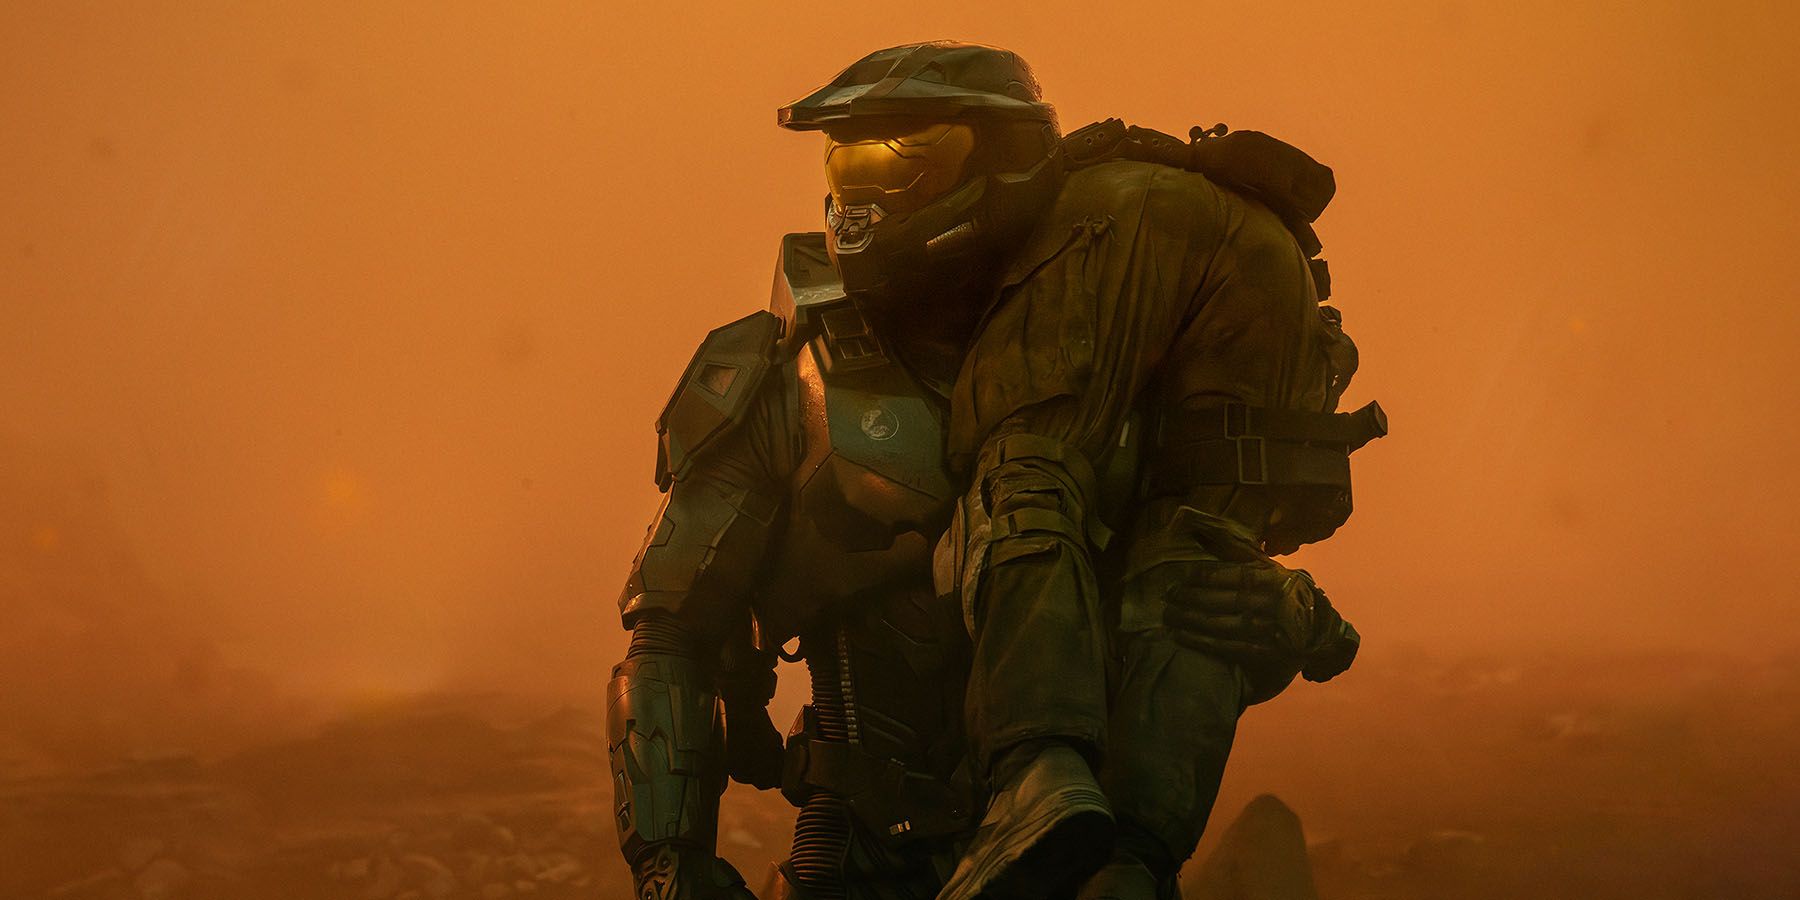 A screenshot of Master Chief carrying a person over his shoulder amid a foggy orange enviroment in the Halo series.